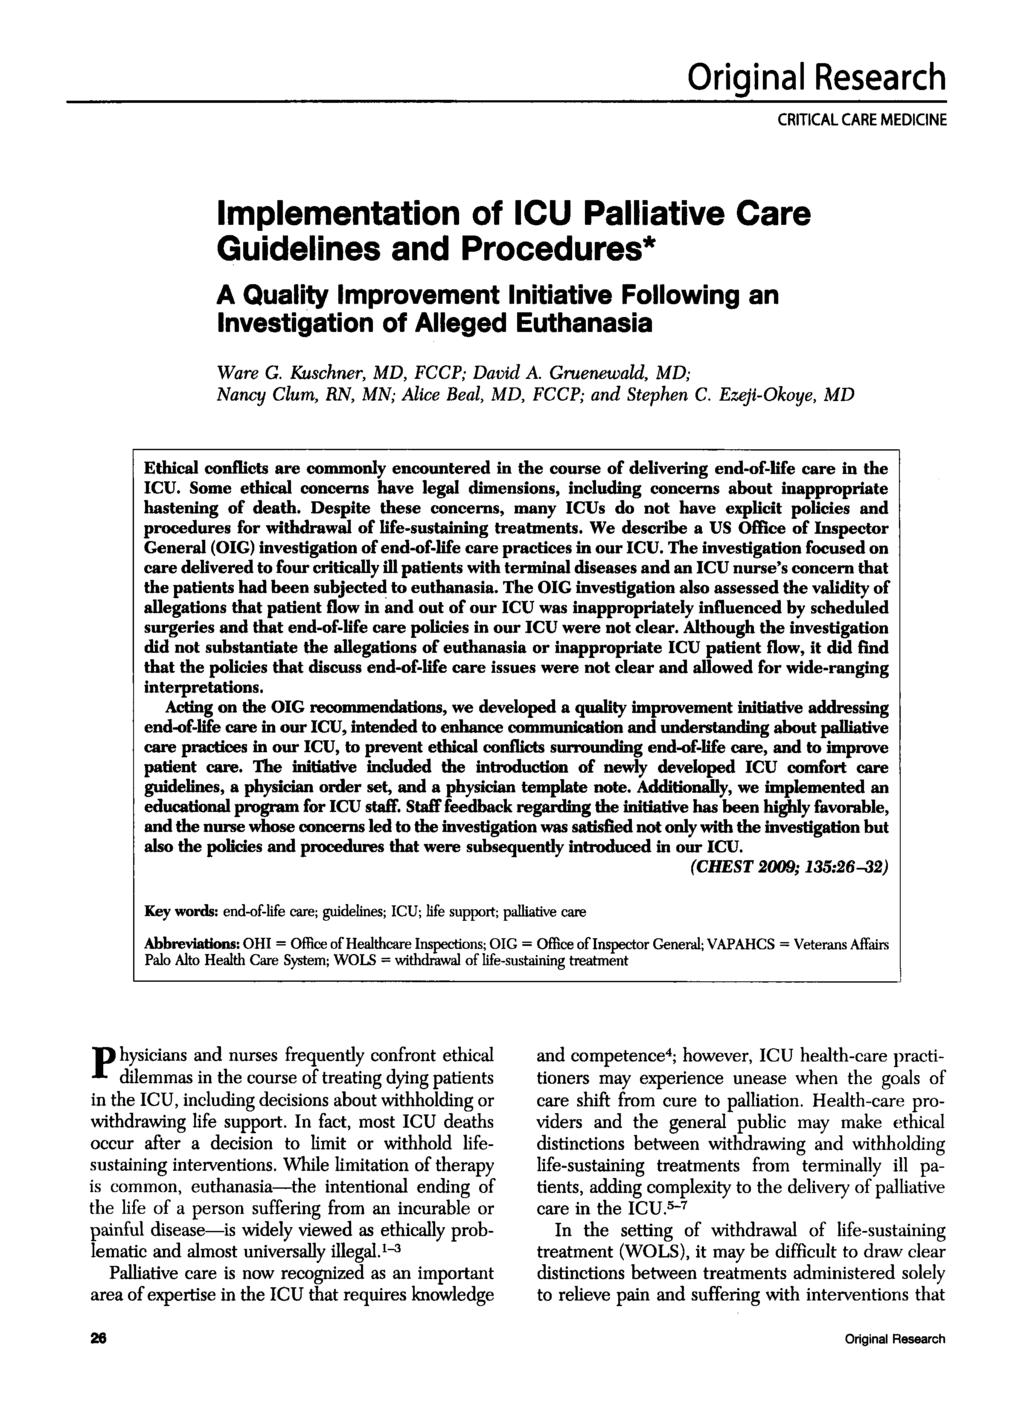 CRITICAL CARE MEDICINE Implementation of ICU Palliative Care Guidelines and Procedures" A Quality Improvement Initiative Following an Investigation of Alleged Euthanasia Ware G.